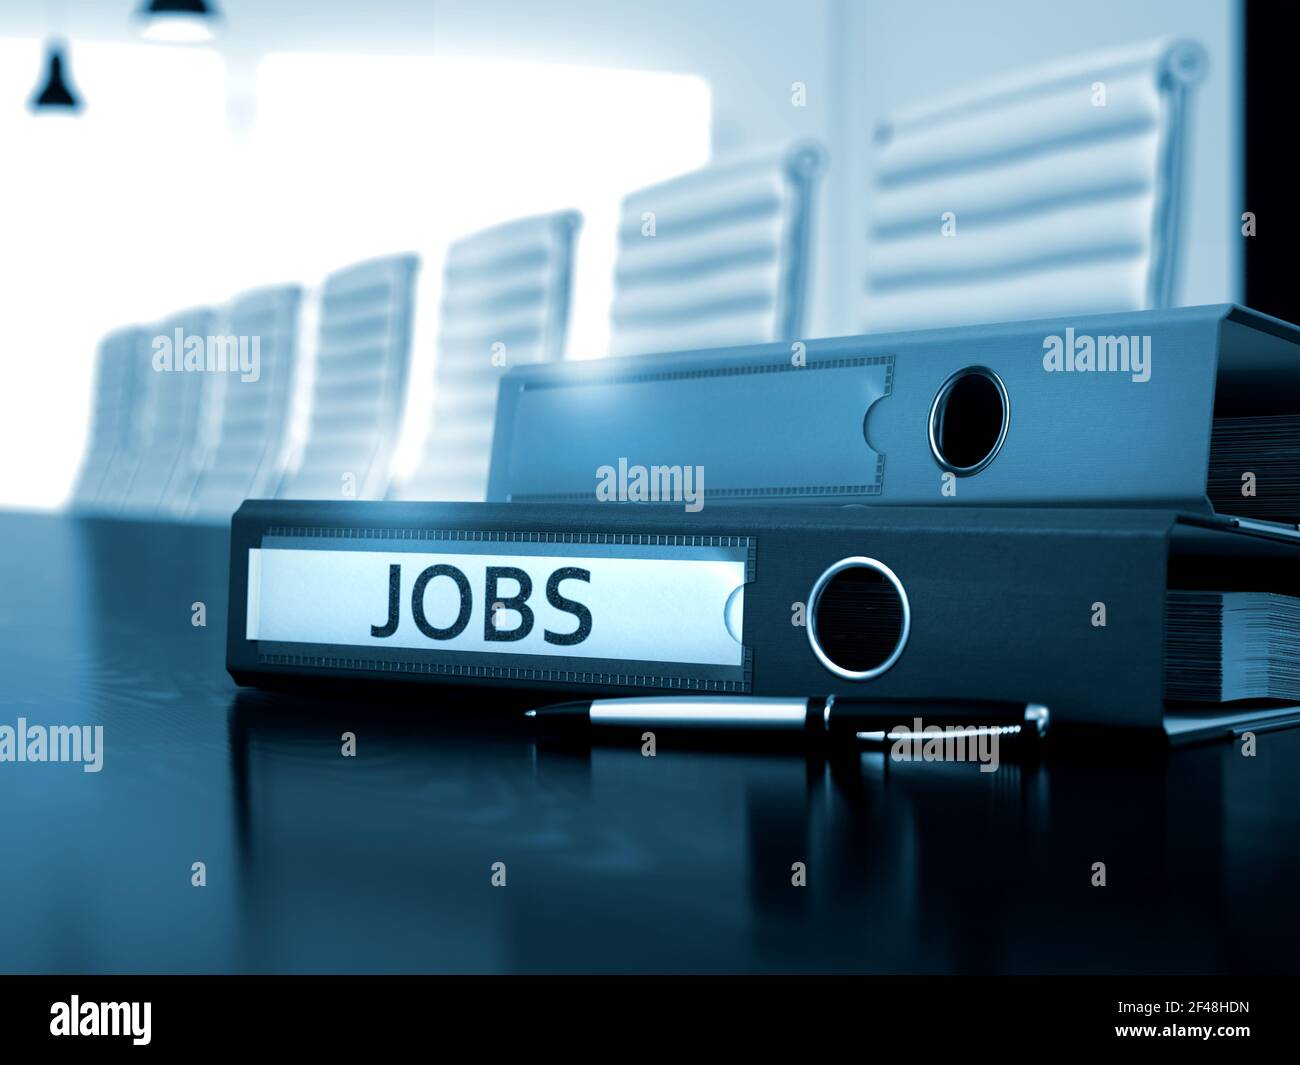 Jobs - Concept. Jobs. Illustration on Toned Background. Office Binder with Inscription Jobs on Wooden Black Desk. Jobs - Office Binder on Desktop. 3D Render. Stock Photo